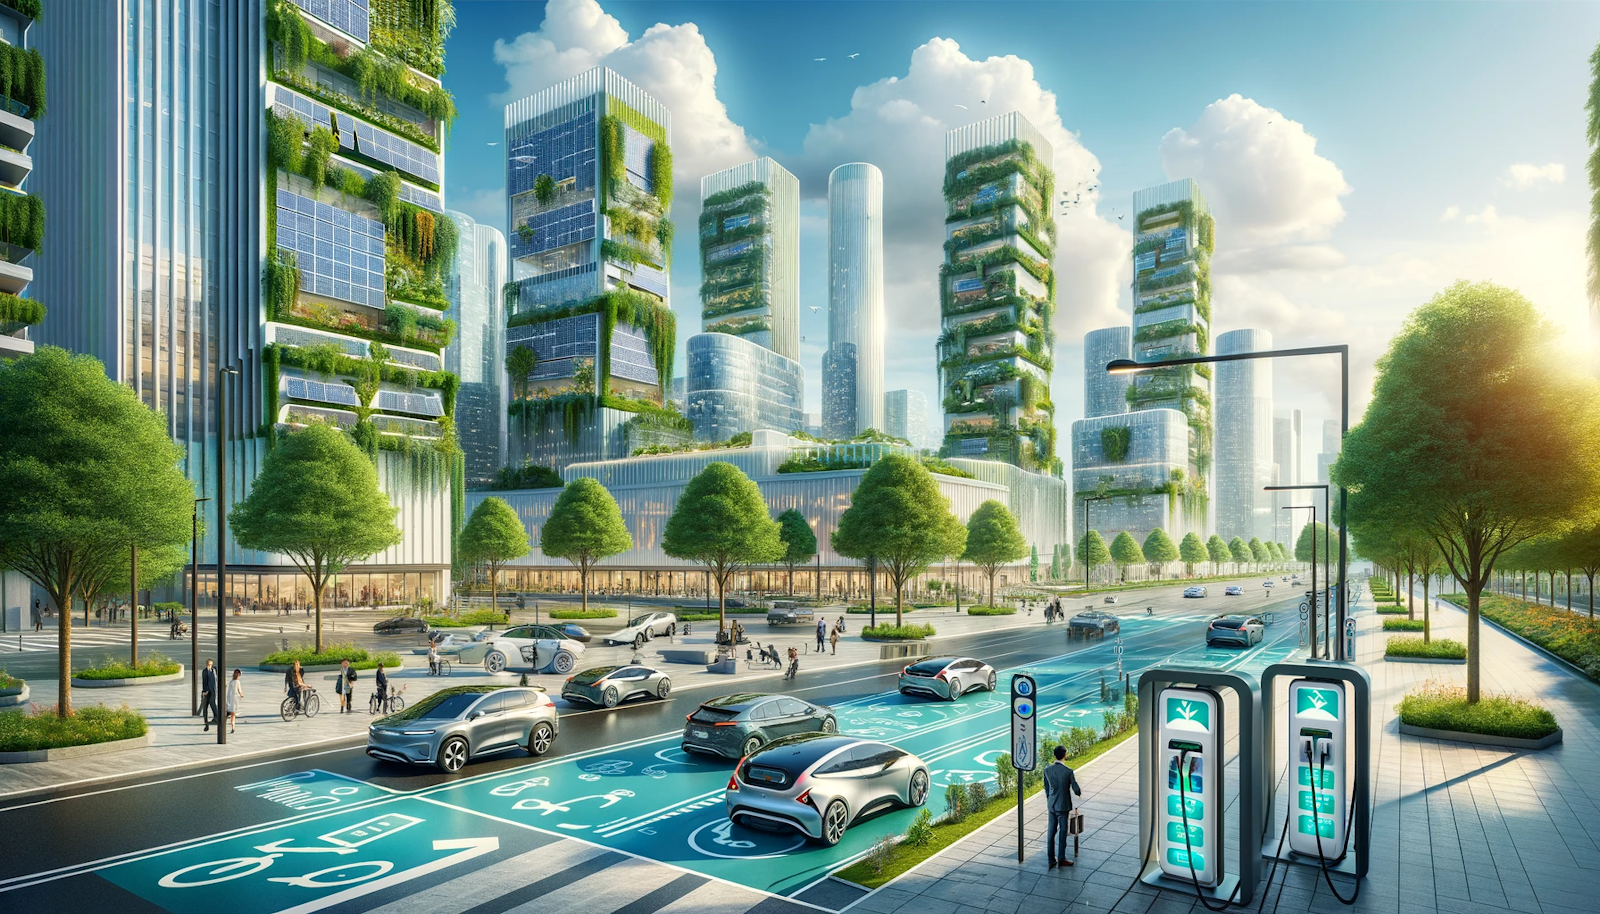 Futuristic cityscape with high-rise buildings featuring vertical gardens and solar panels, bustling streets with electric vehicles, and pedestrian-friendly, tree-lined sidewalks, exemplifying sustainable urban living.